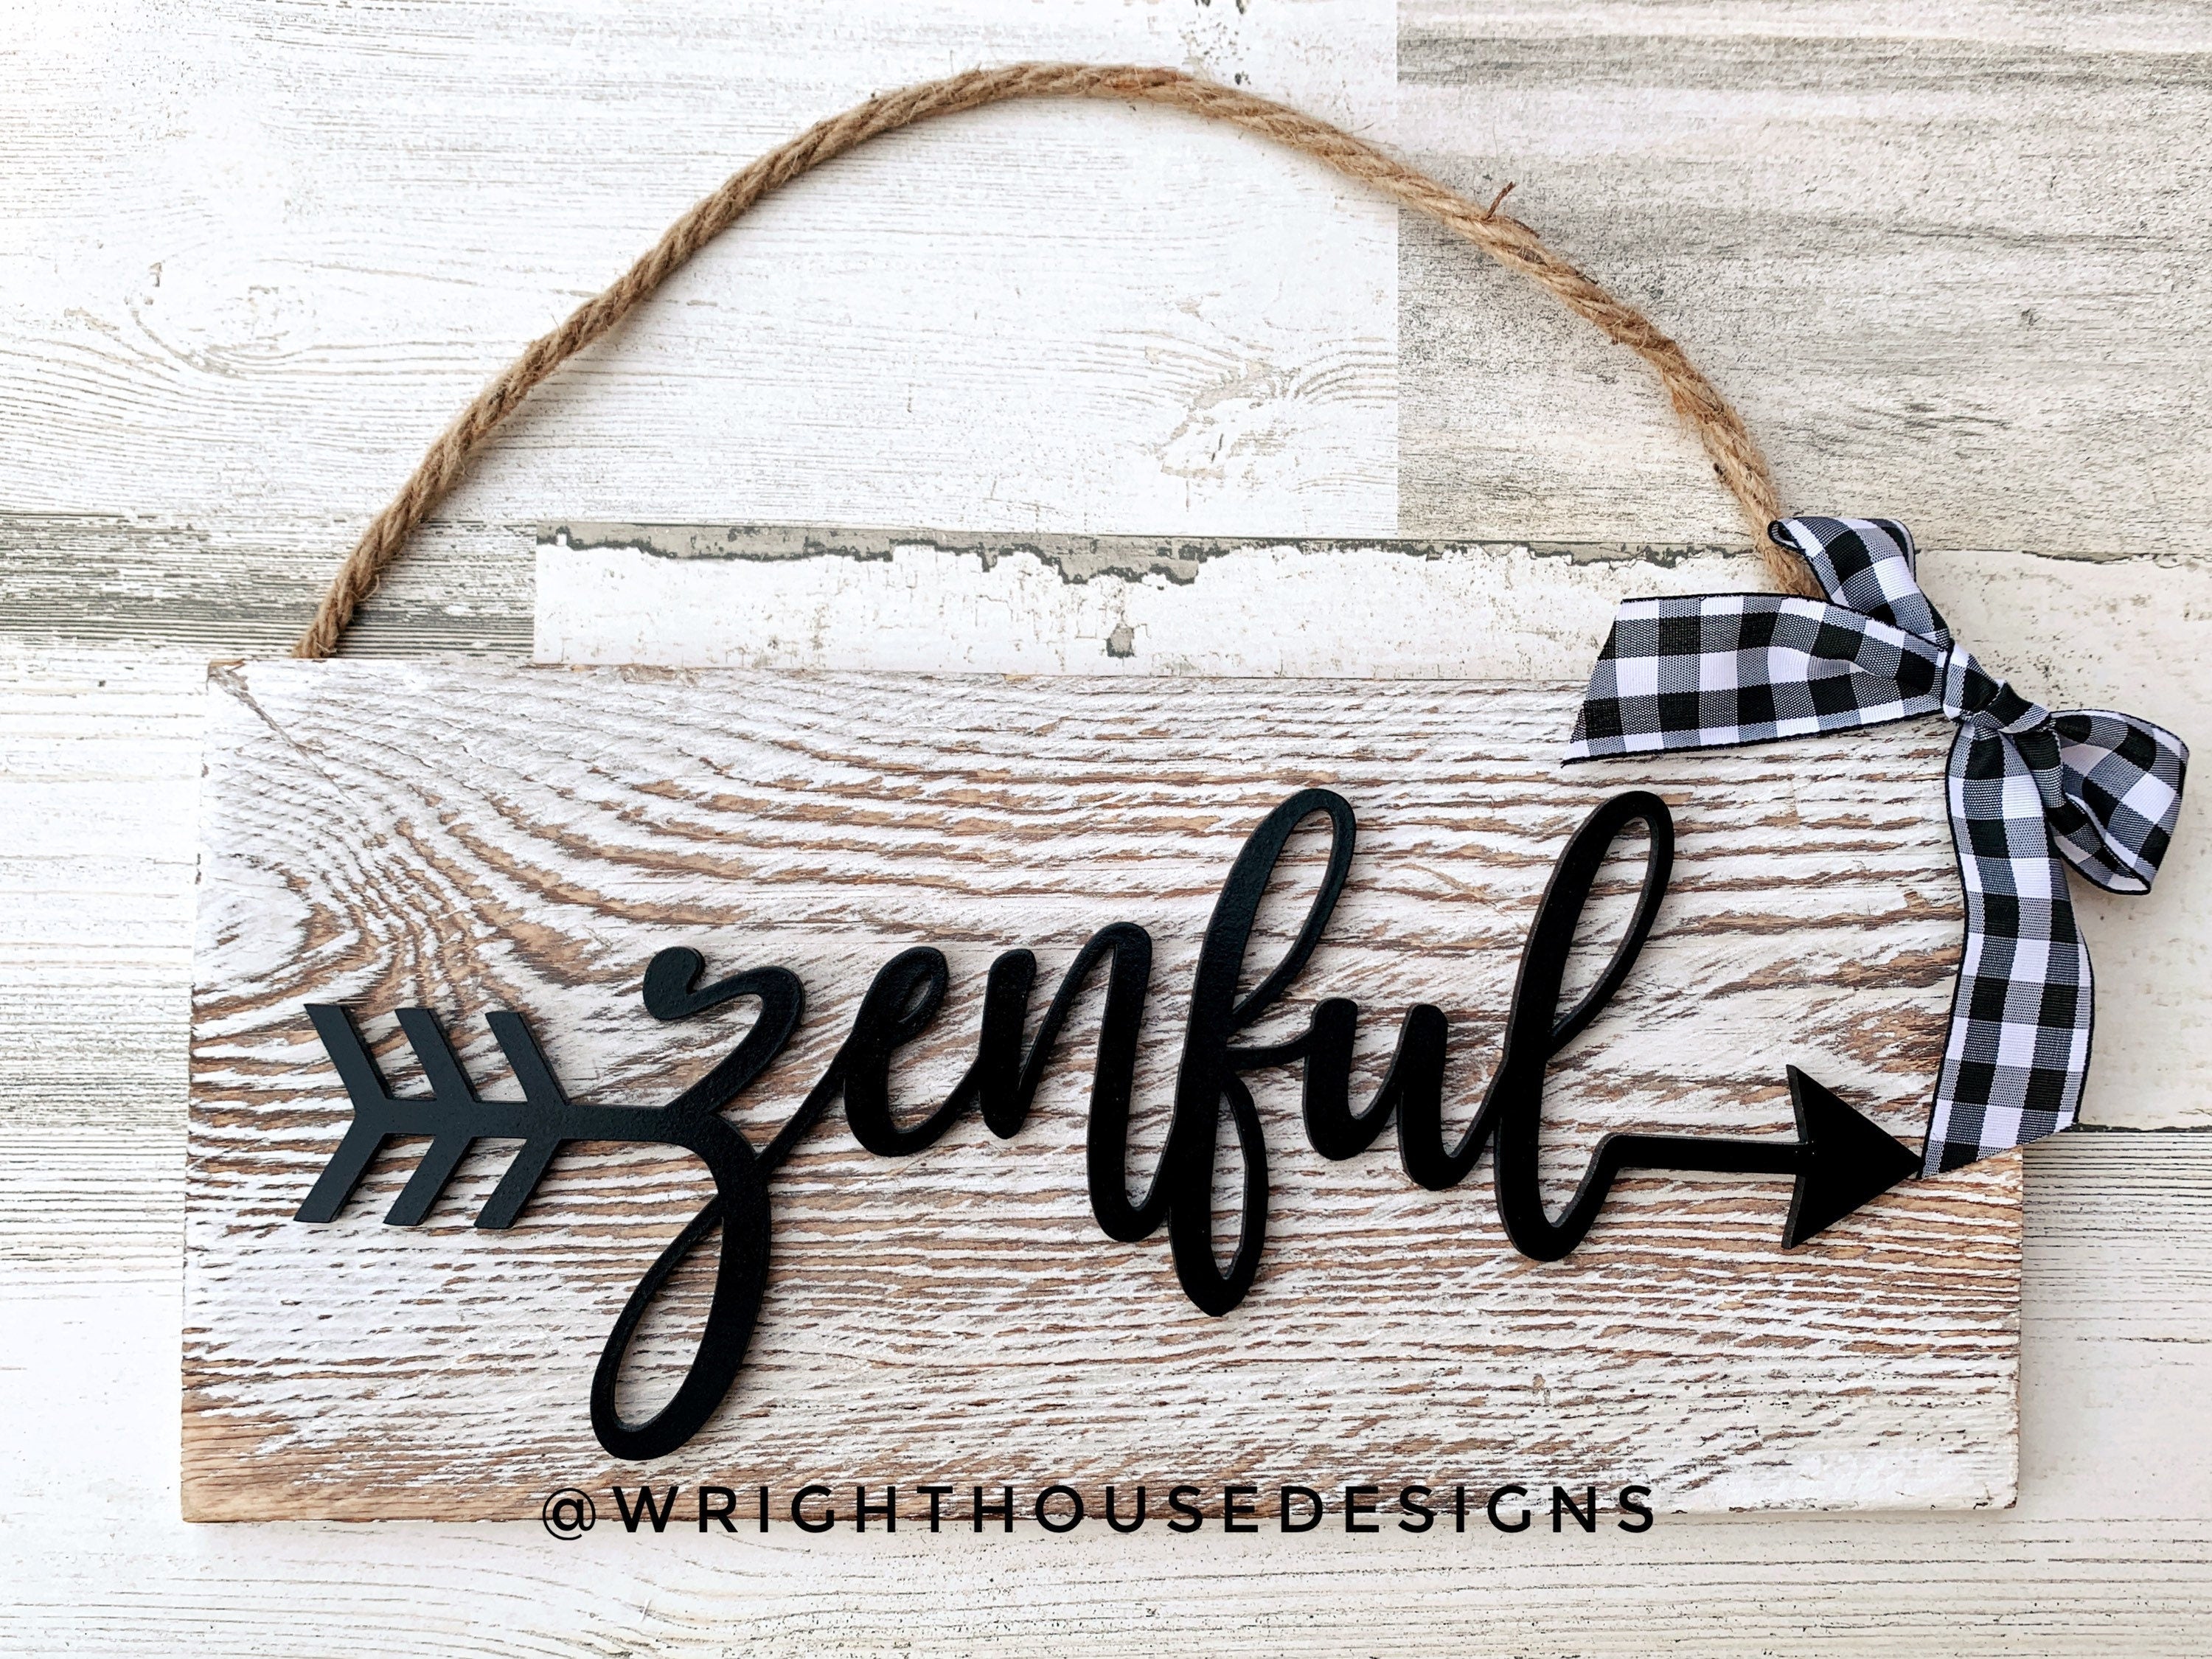 Zenful Arrow Word Art - Rustic Farmhouse - Whitewash Reclaimed Wood Plank Board Sign - Wooden Wall Art - Home Decor and She Shed Signs